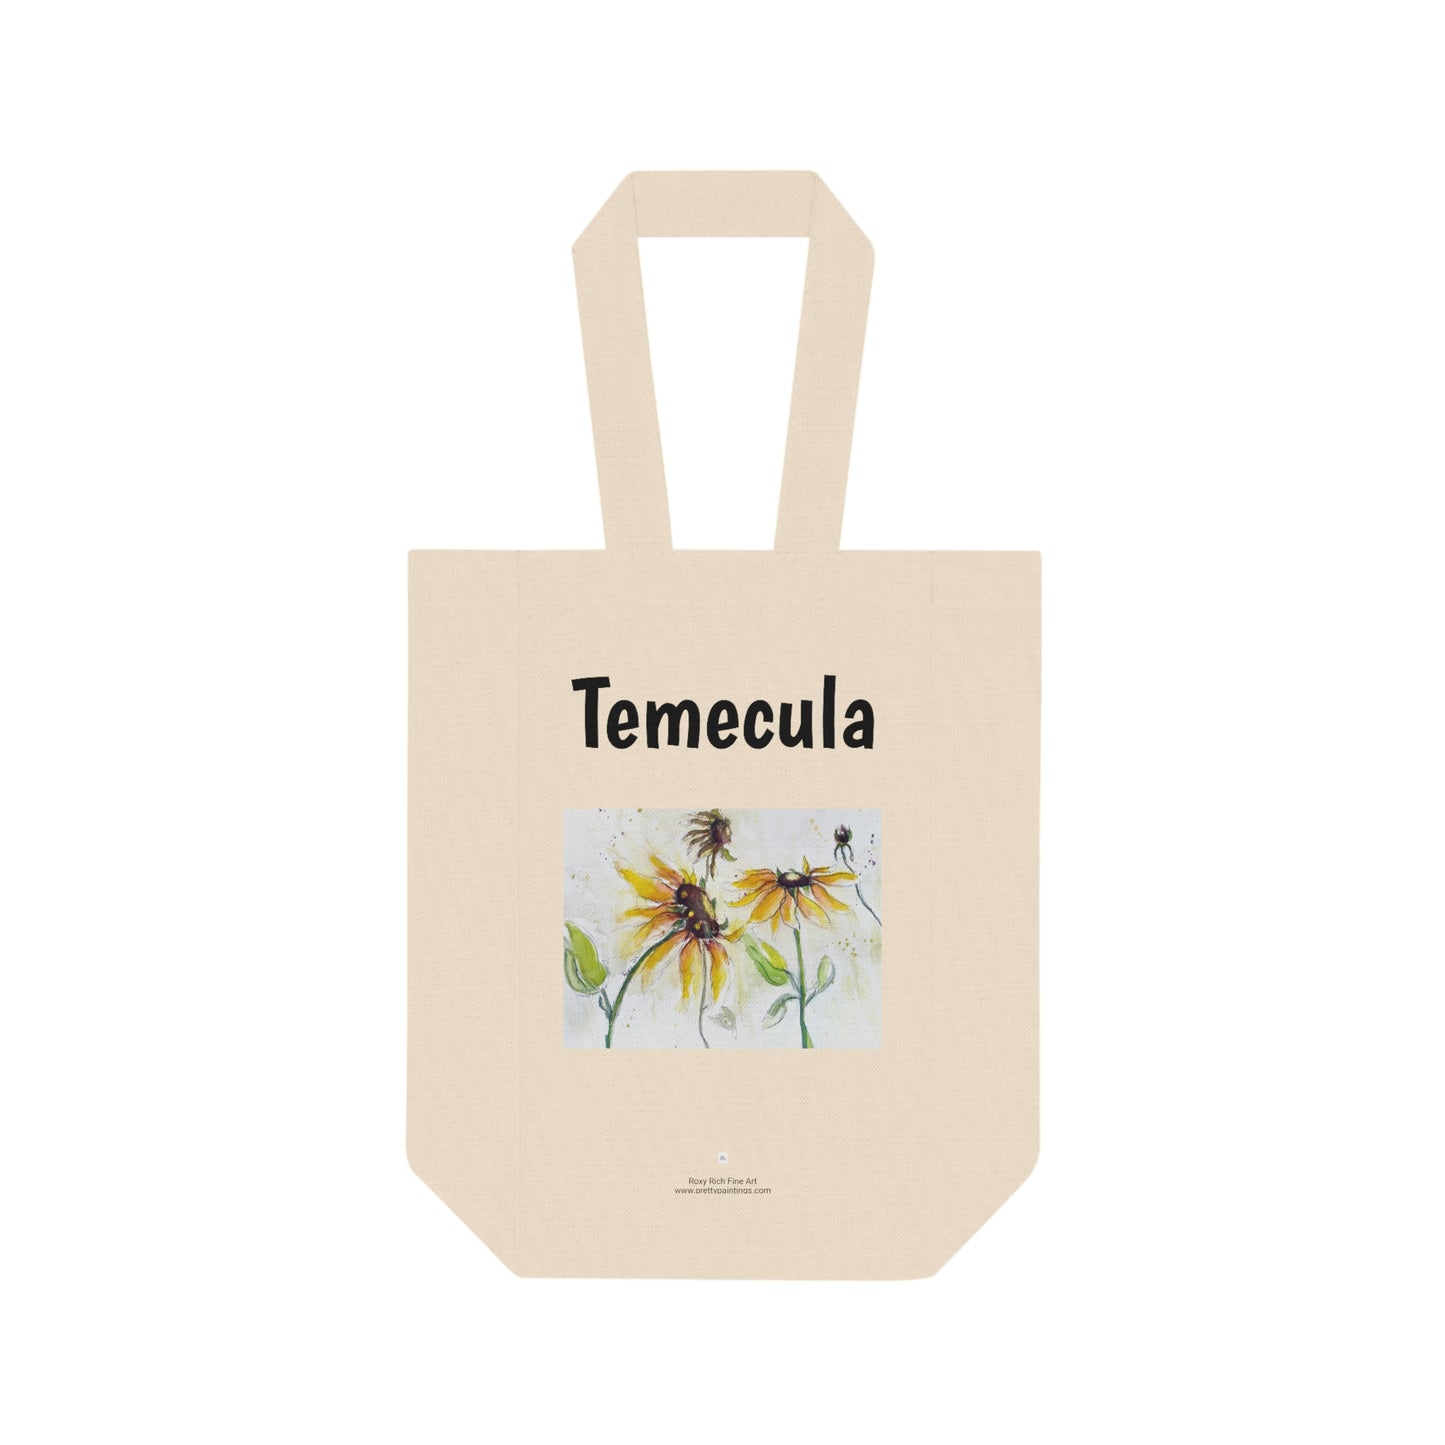 Temecula Double Wine Tote Bag featuring "Autumn Sunflowers" painting